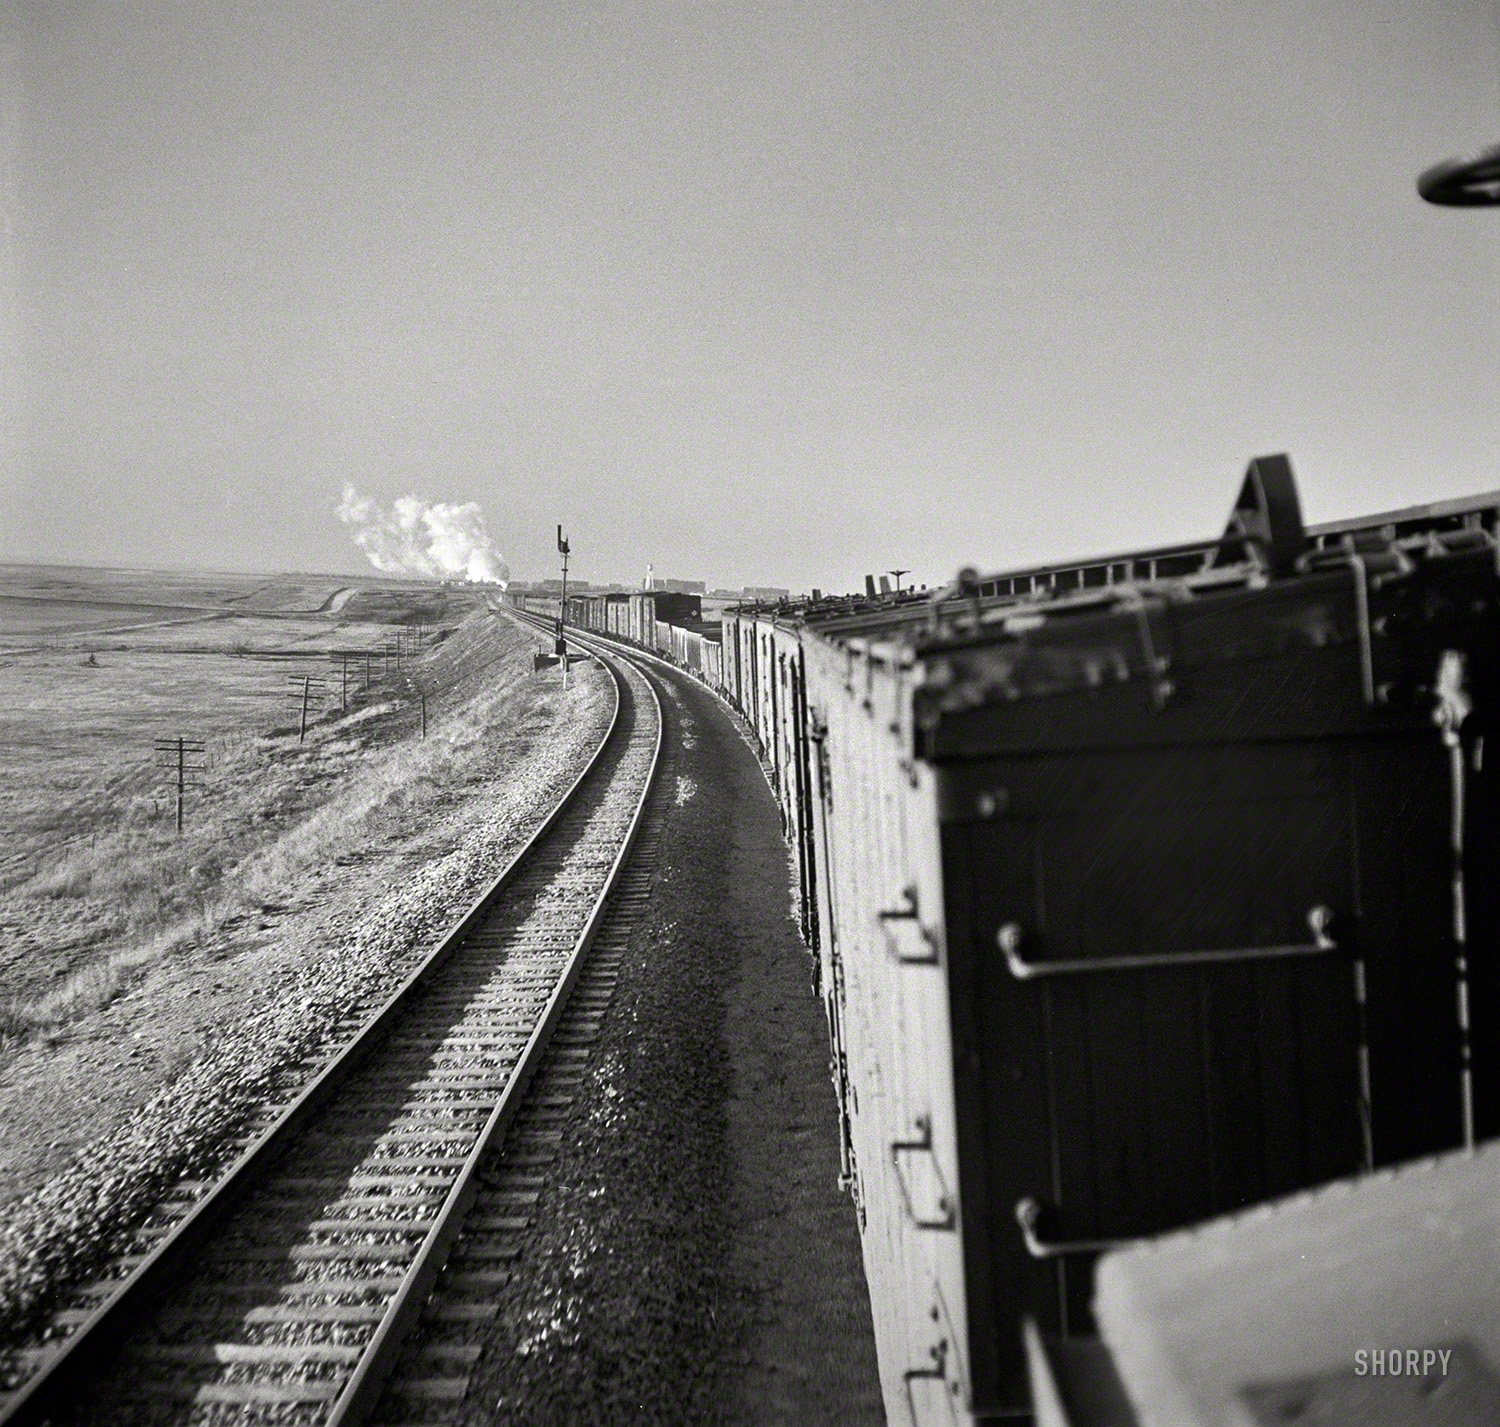 March 1943. "Canyon, Texas. Approaching the town on the Atchison, Topeka & Santa Fe Railroad between Amarillo, Texas, and Clovis, New Mexico." One of hundreds of photos documenting Jack Delano's trip from Chicago to California on a Santa Fe freight for the Office of War Information. View full size.